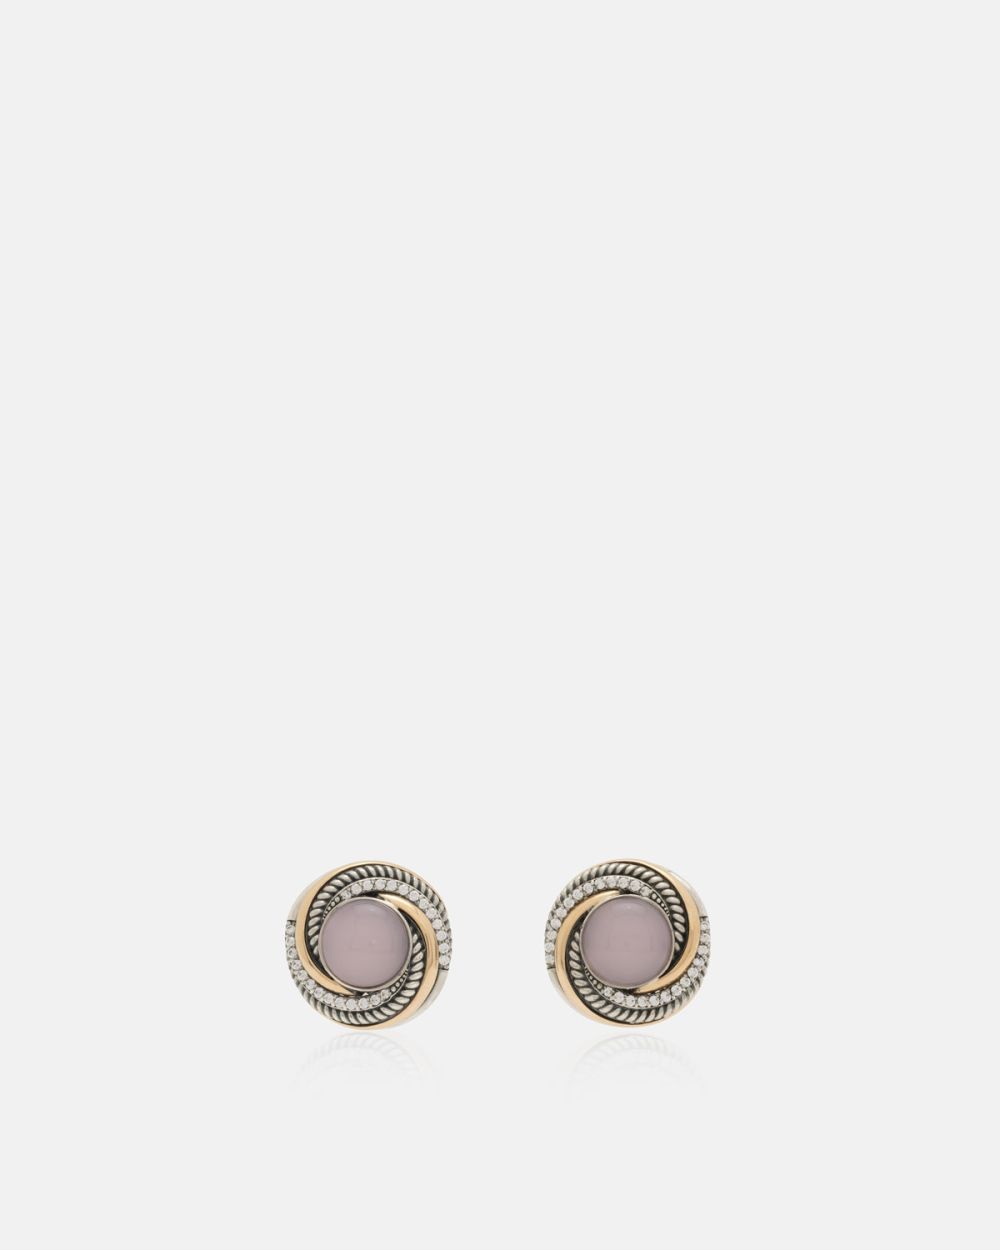 Sublime Earrings in Gold and Silver